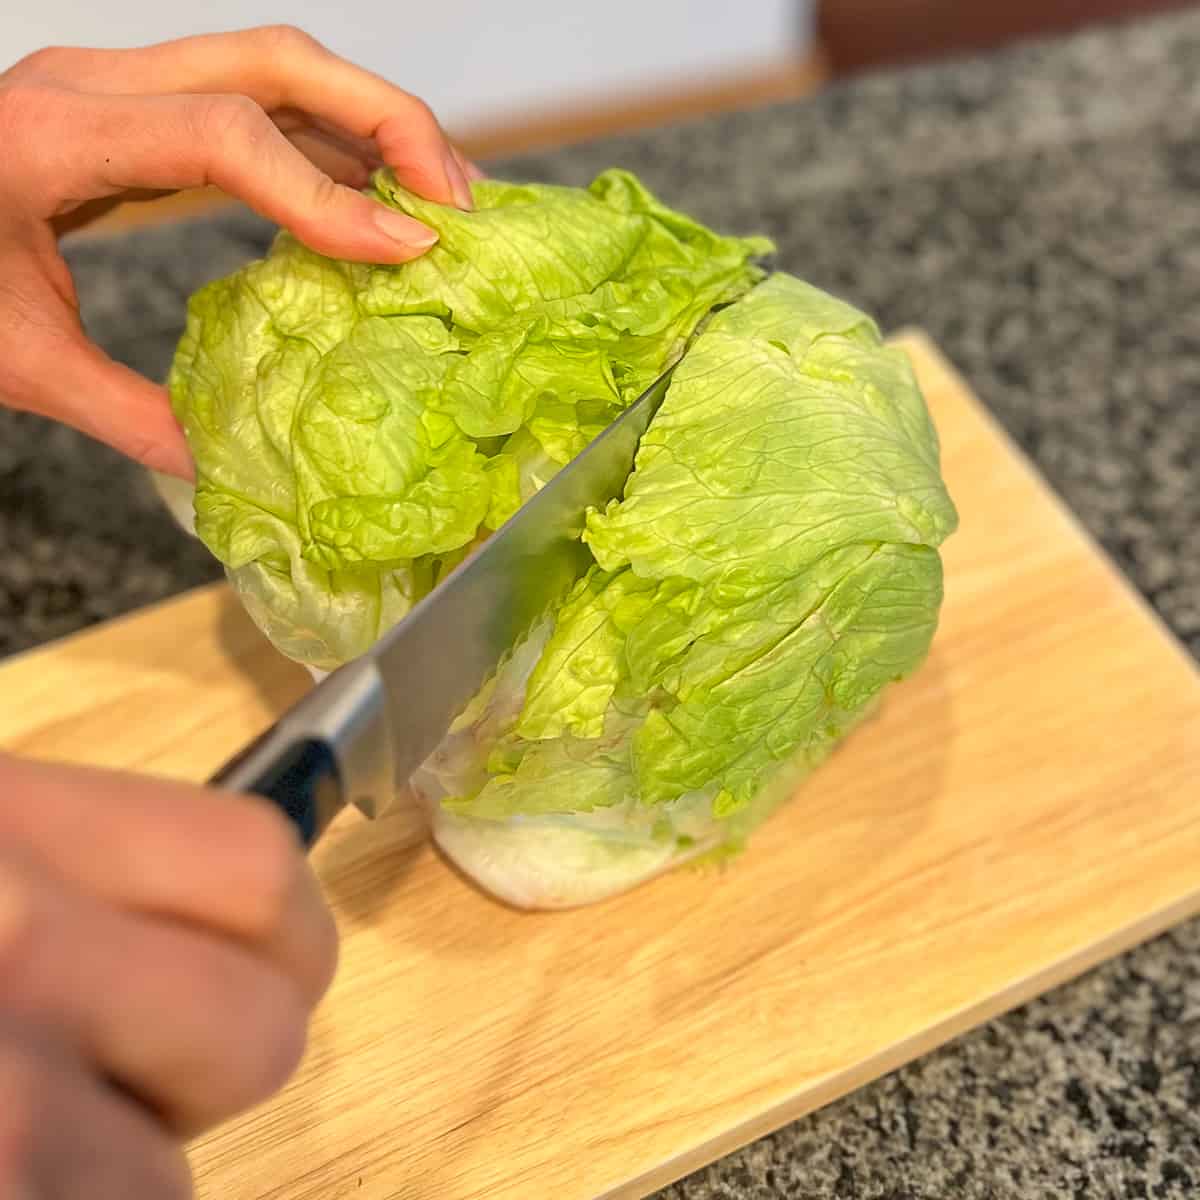 A head of iceberg lettuce being cut with a knife into a lettuce bun.